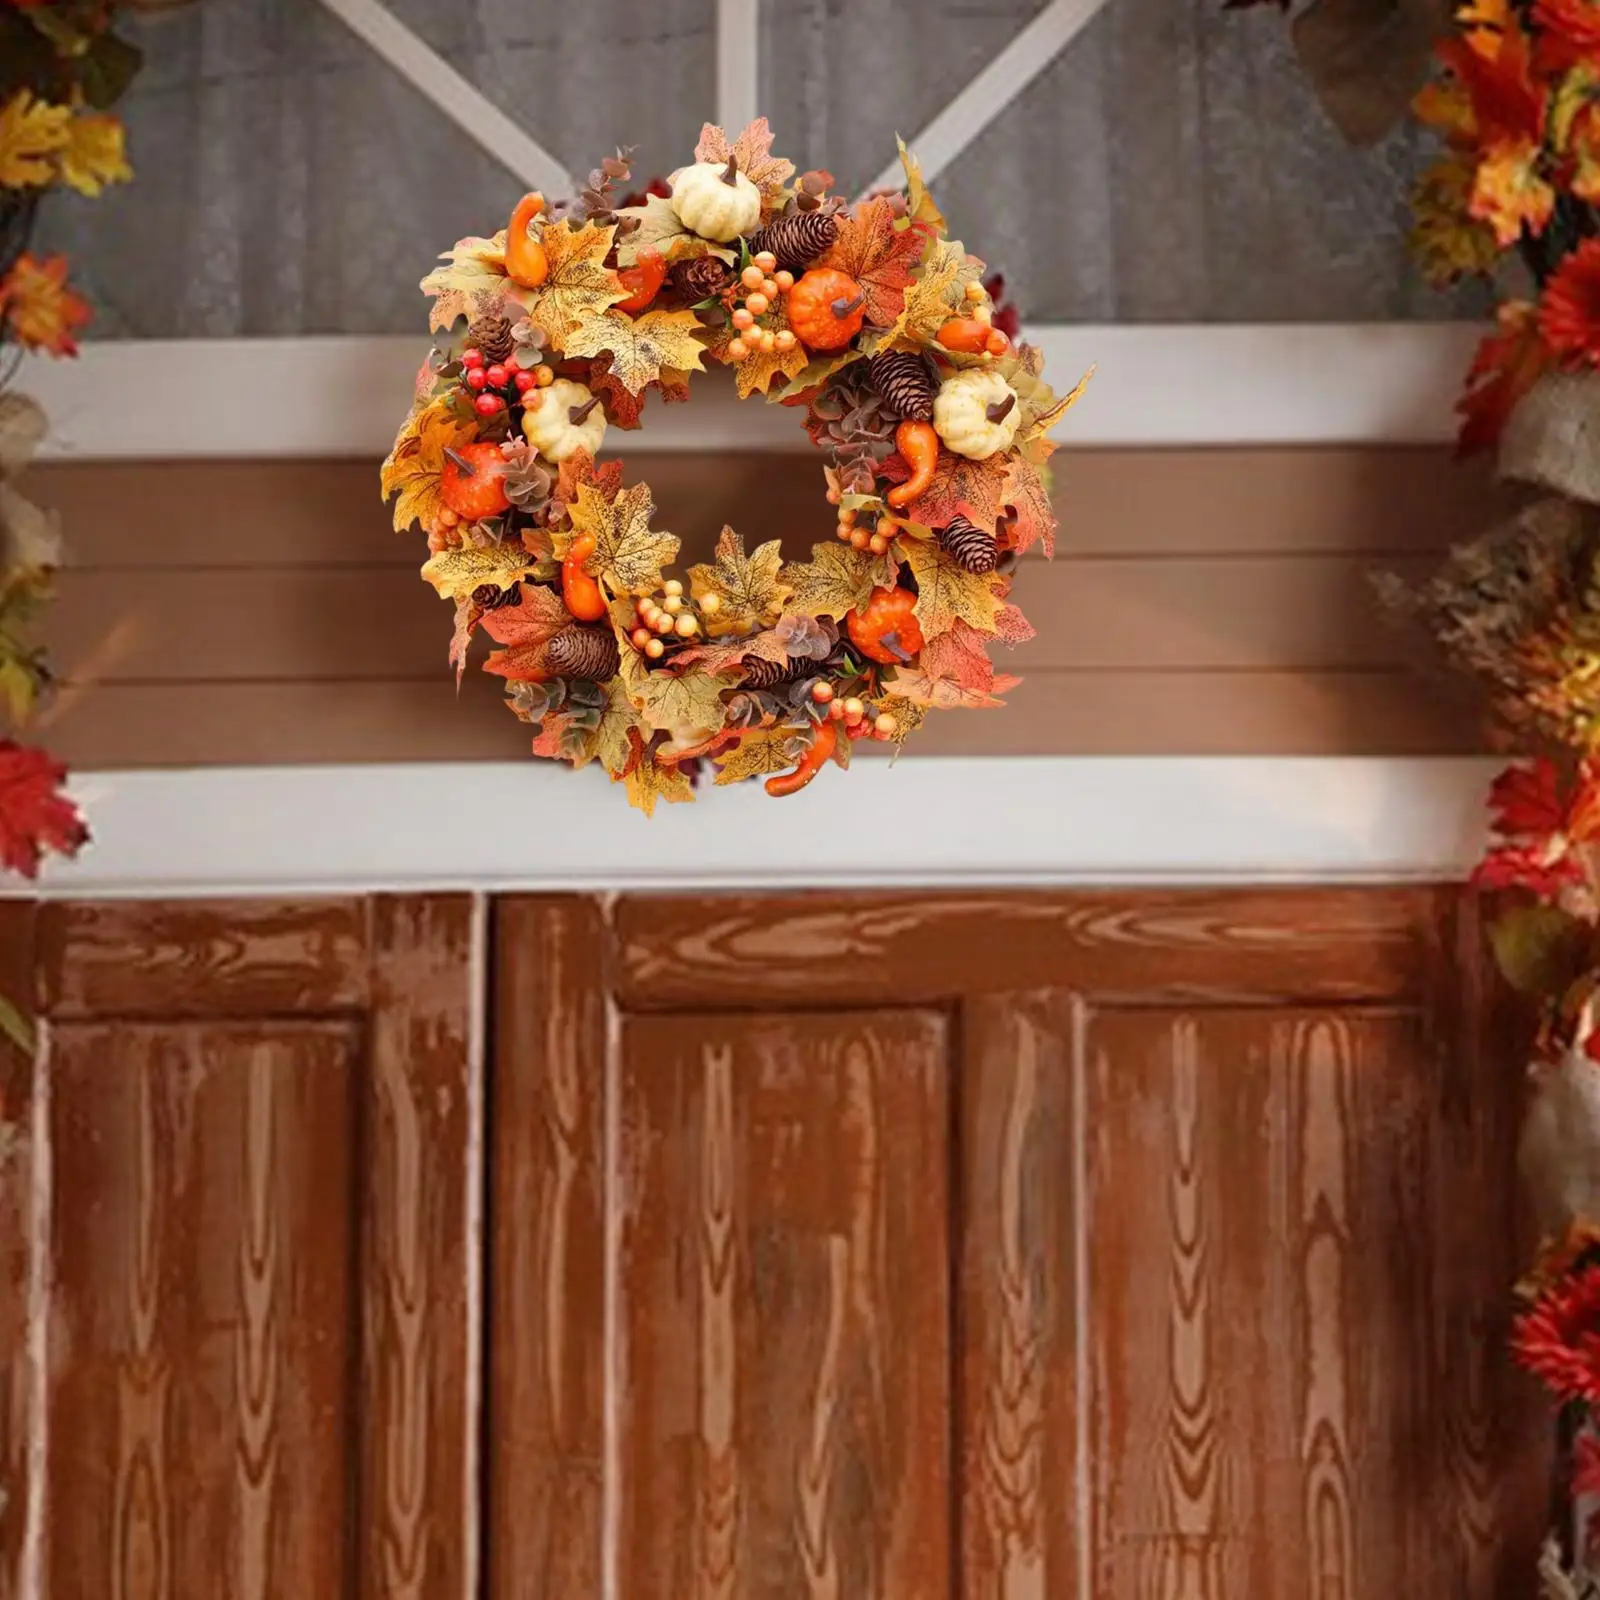 Artificial Fall Pumpkin Wreath Decor Harvest Hanging for Home Wall Indoor